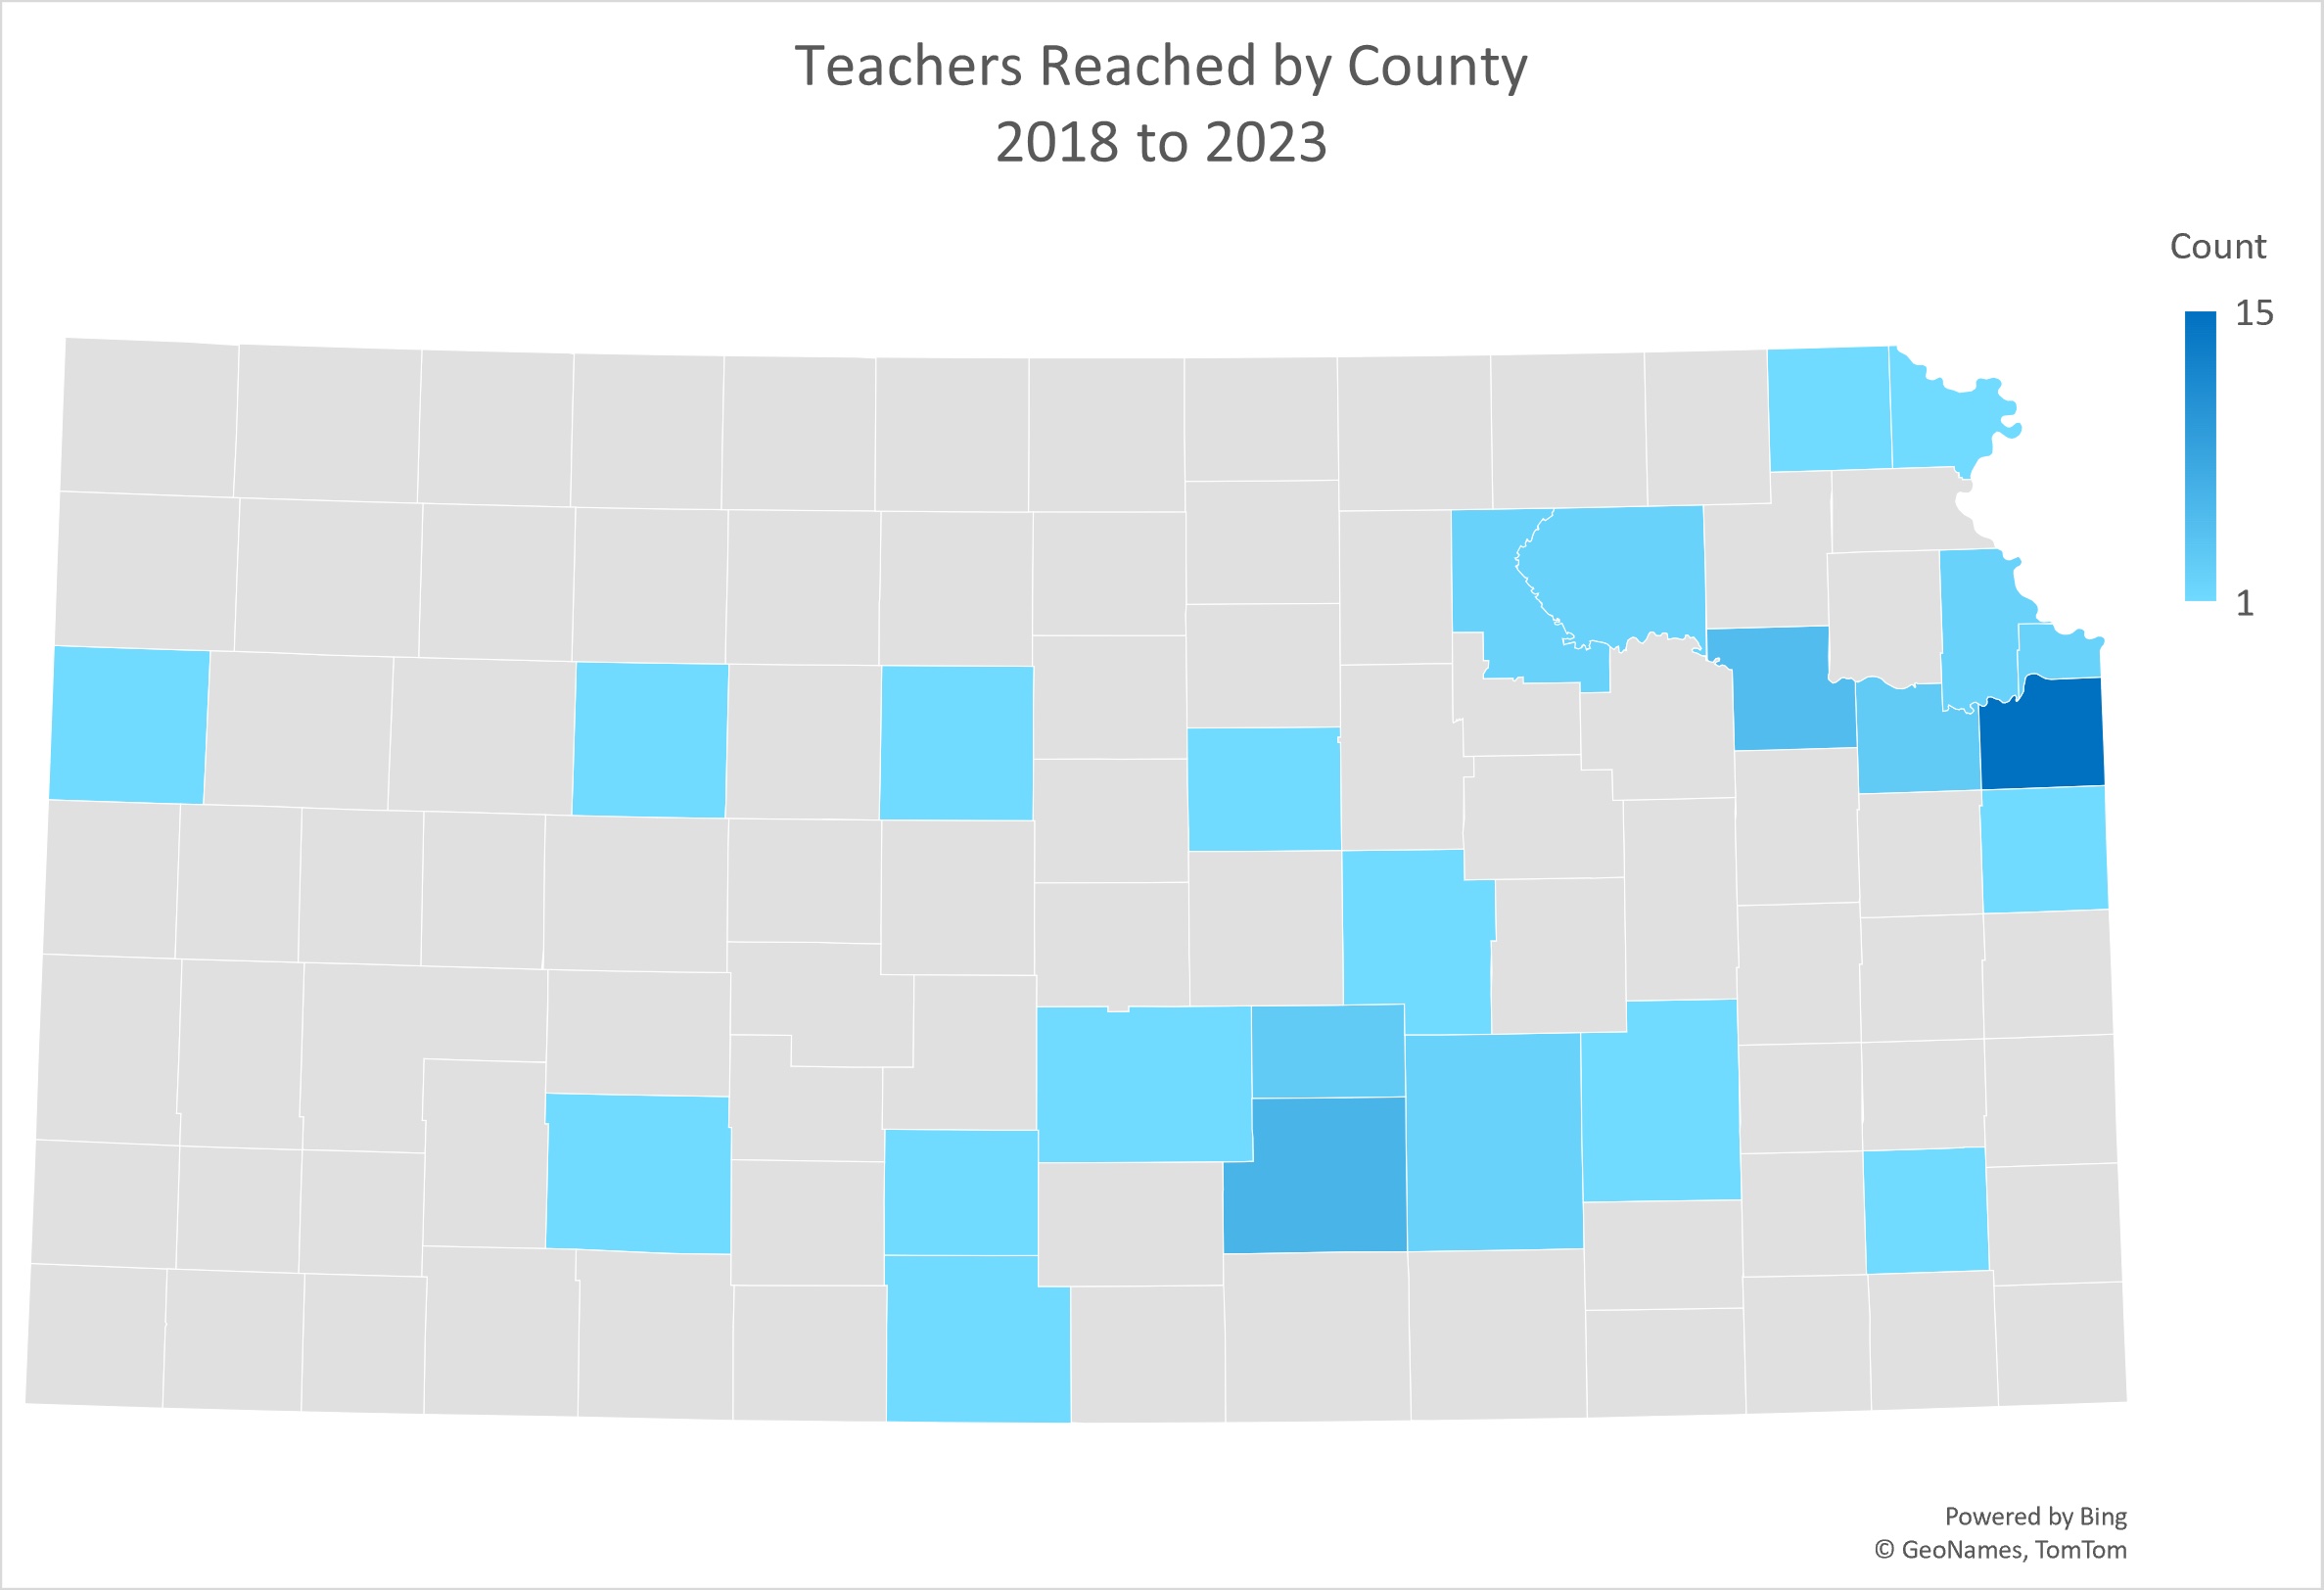 Map of Kansas showing the teachers reached by county